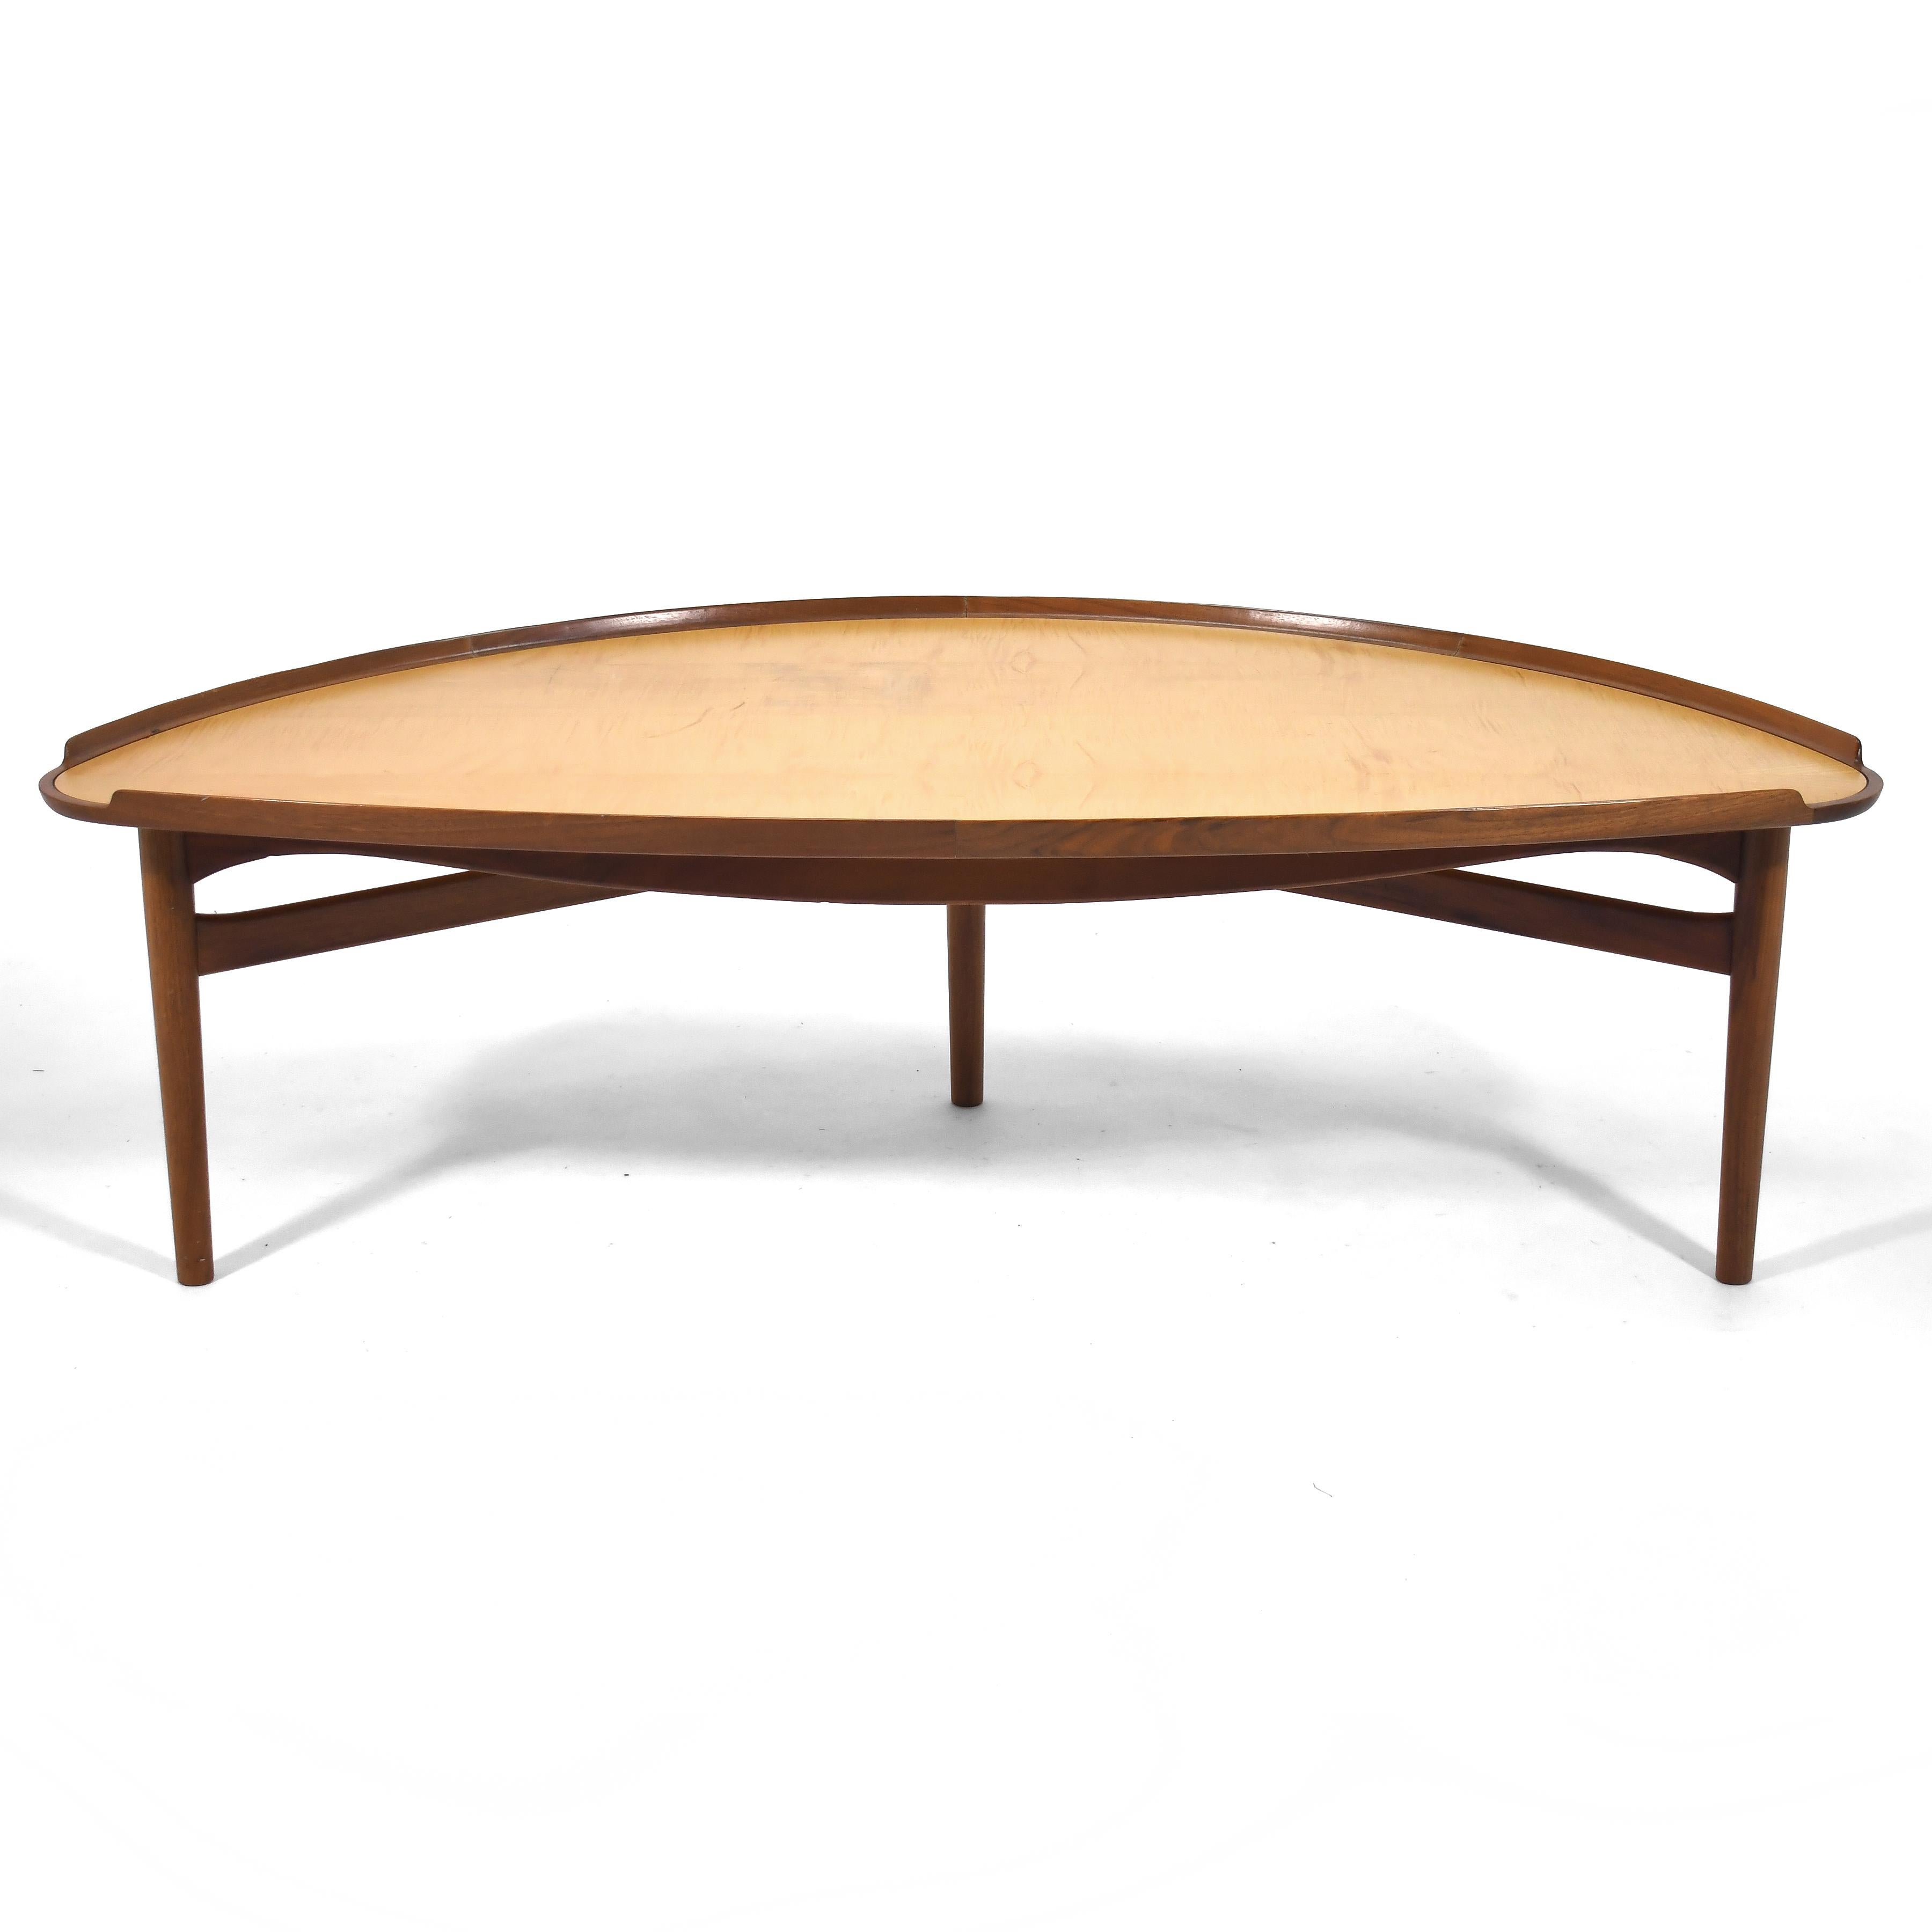 Finn Juhl Coffee Table by Baker In Good Condition For Sale In Highland, IN